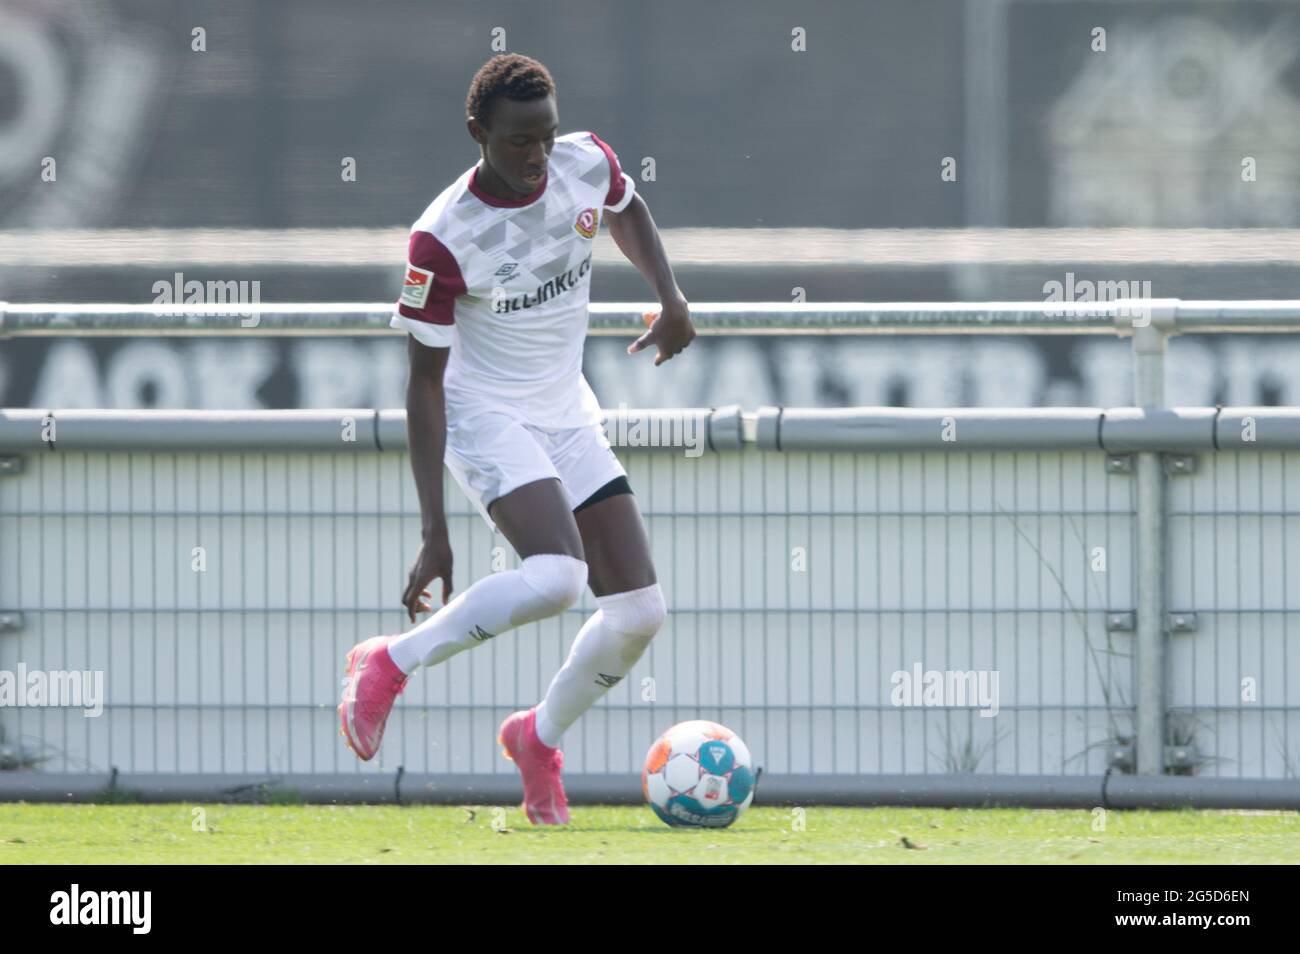 Dresden, Germany. 26th June, 2021. Football: Test match, SG Dynamo - Hertha BSC II, AOK PLUS Walter-Fritzsch-Akademie. Dynamo's Meissa Diop plays the ball. Credit: Sebastian Kahnert/dpa-Zentralbild/dpa - IMPORTANT NOTE: In accordance with the regulations of the DFL Deutsche Fußball Liga and/or the DFB Deutscher Fußball-Bund, it is prohibited to use or have used photographs taken in the stadium and/or of the match in the form of sequence pictures and/or video-like photo series./dpa/Alamy Live News Stock Photo